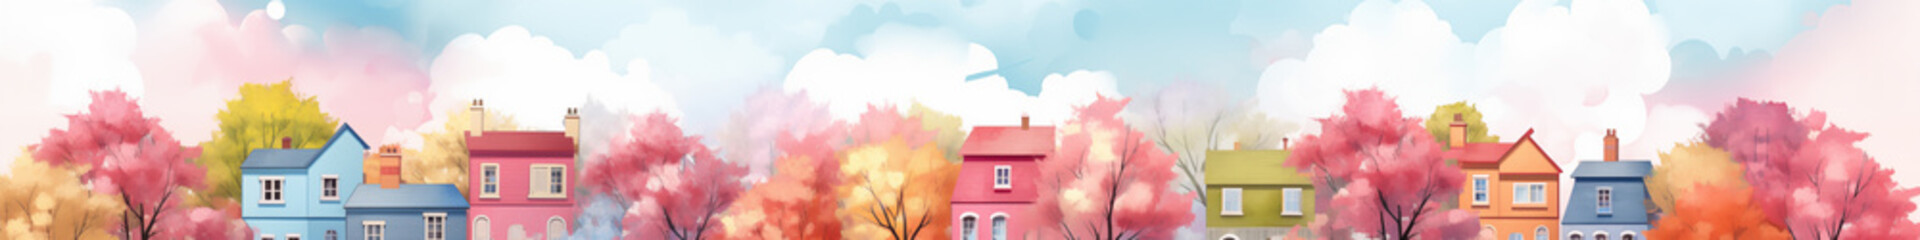 Colorful trees . Art horizontal banner with street and cute houses art design